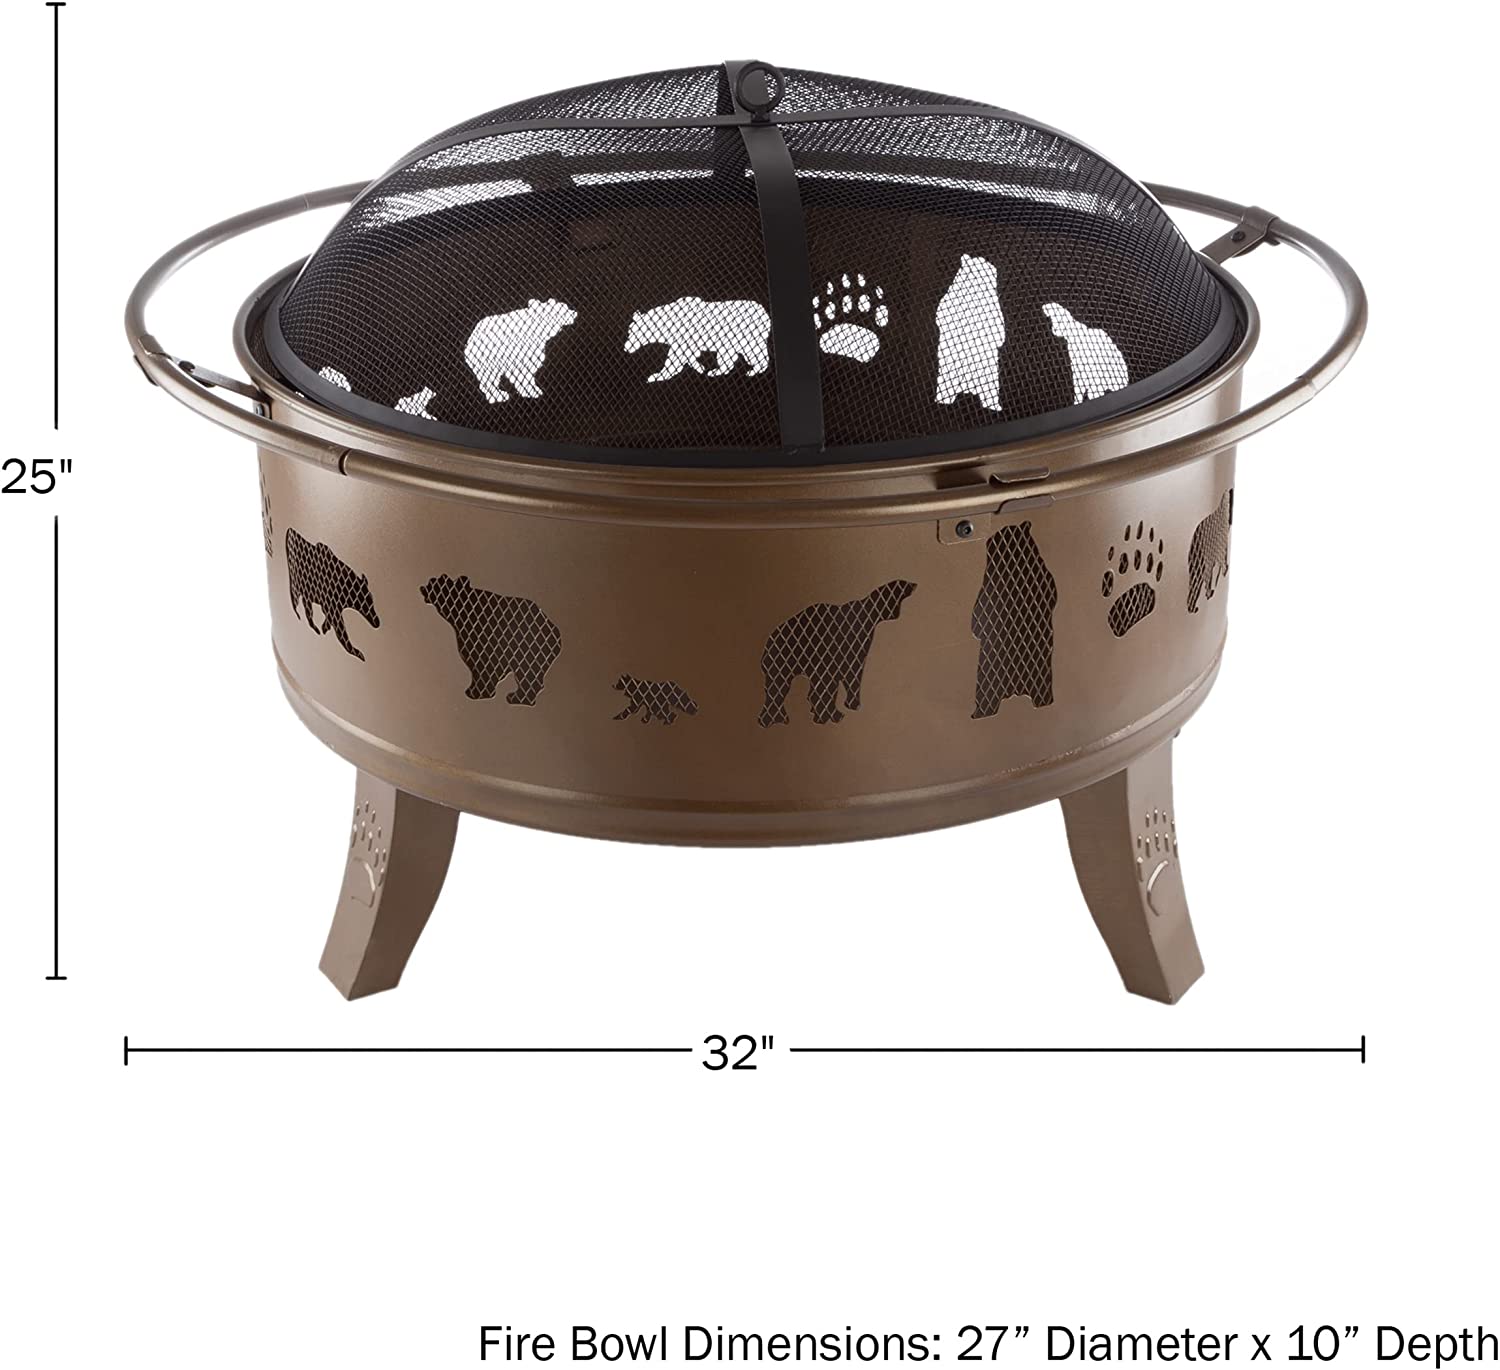 Nature Spring 50-LG1202 32” Outdoor Deep Fire Pit-Round Large Steel Bowl with Bear Cutouts， Mesh Spark Screen， Log Poker and Storage Cover-Patio Wood Burning， Antique Gold